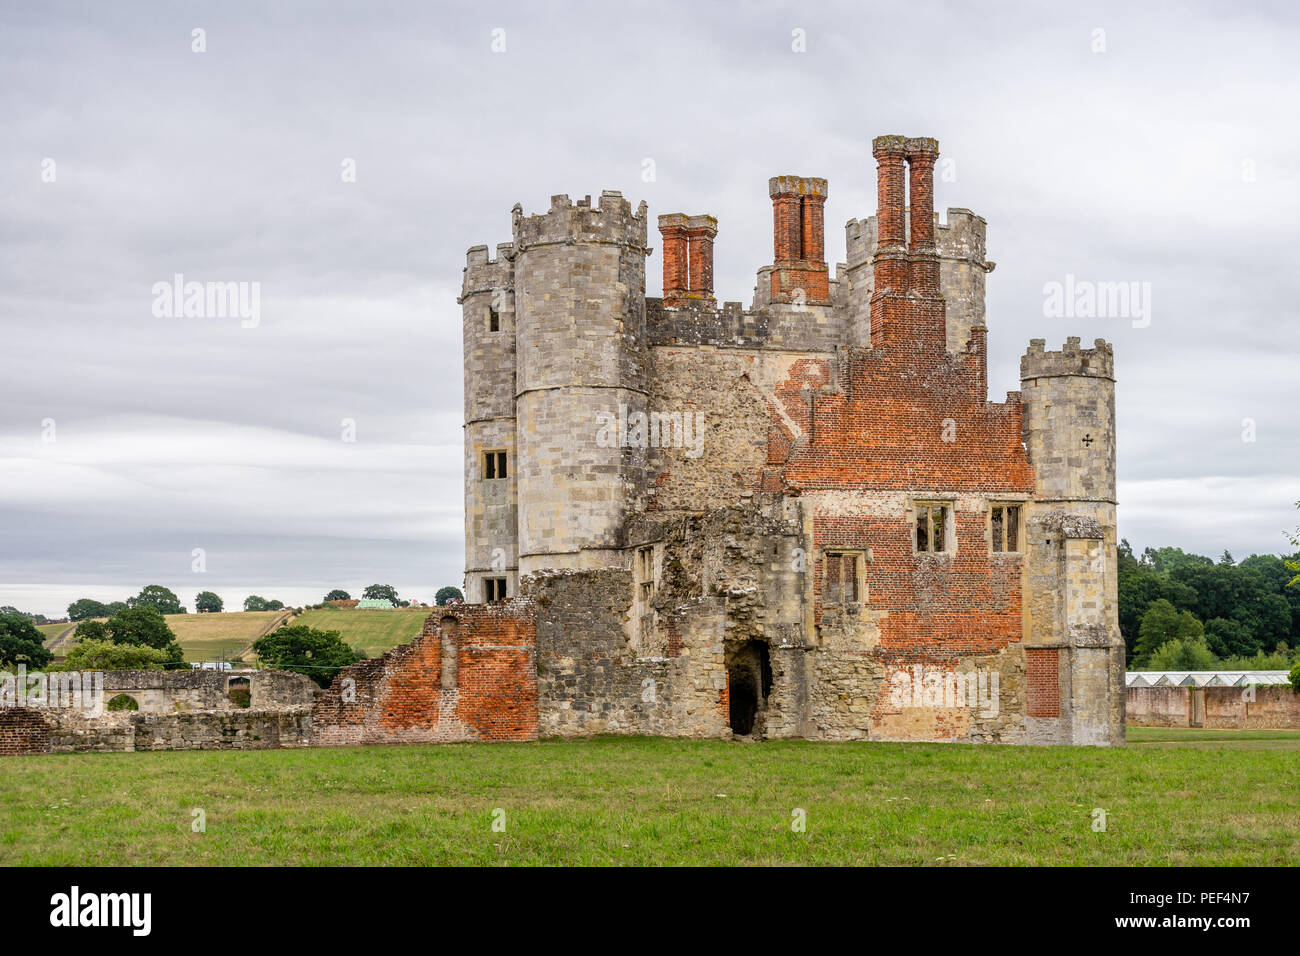 The remains of the medieval Titchfield Abbey surrounded by the Hampshire countryside, English Heritage site, Titchfield, Hampshire, England, UK Stock Photo